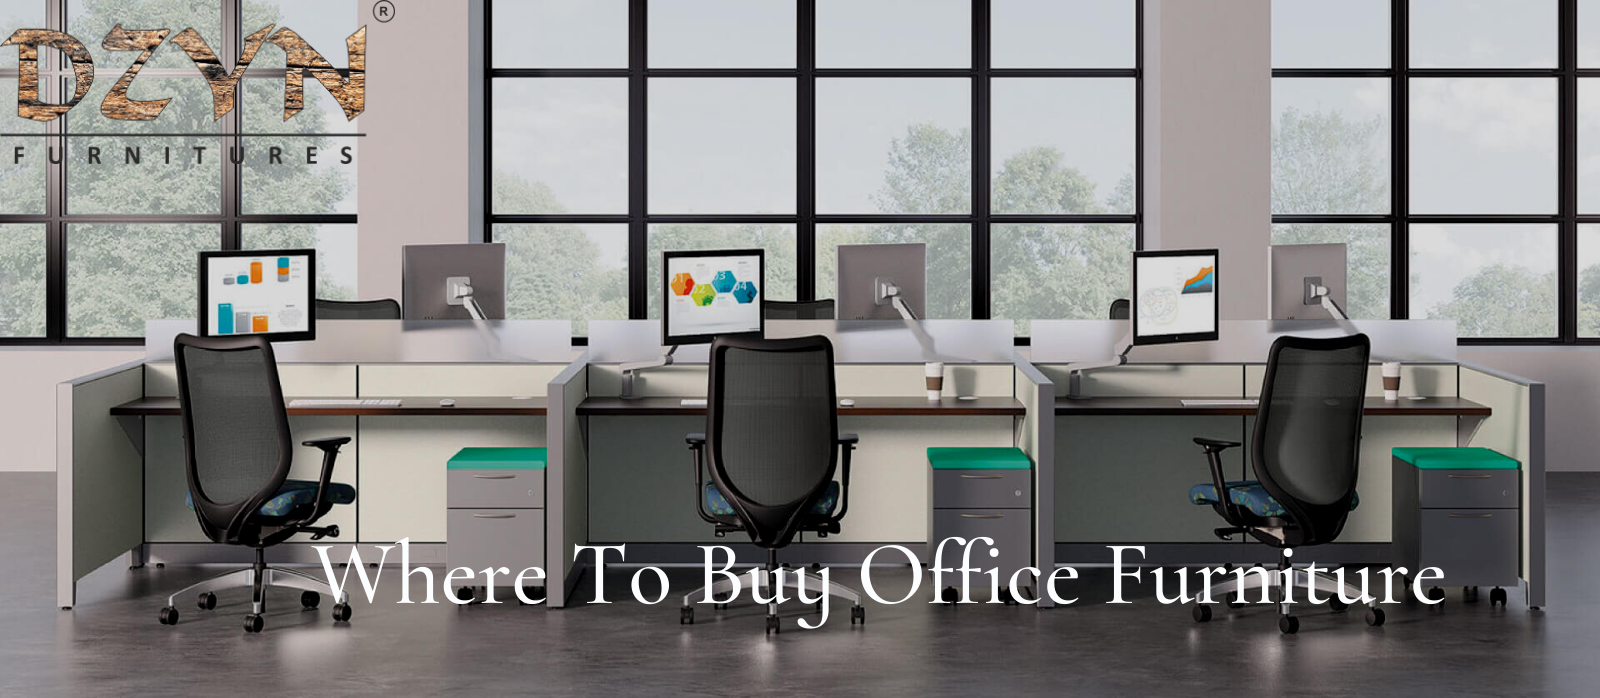 public/uploads/2021/03/Where-To-Buy-Office-Furniture.png